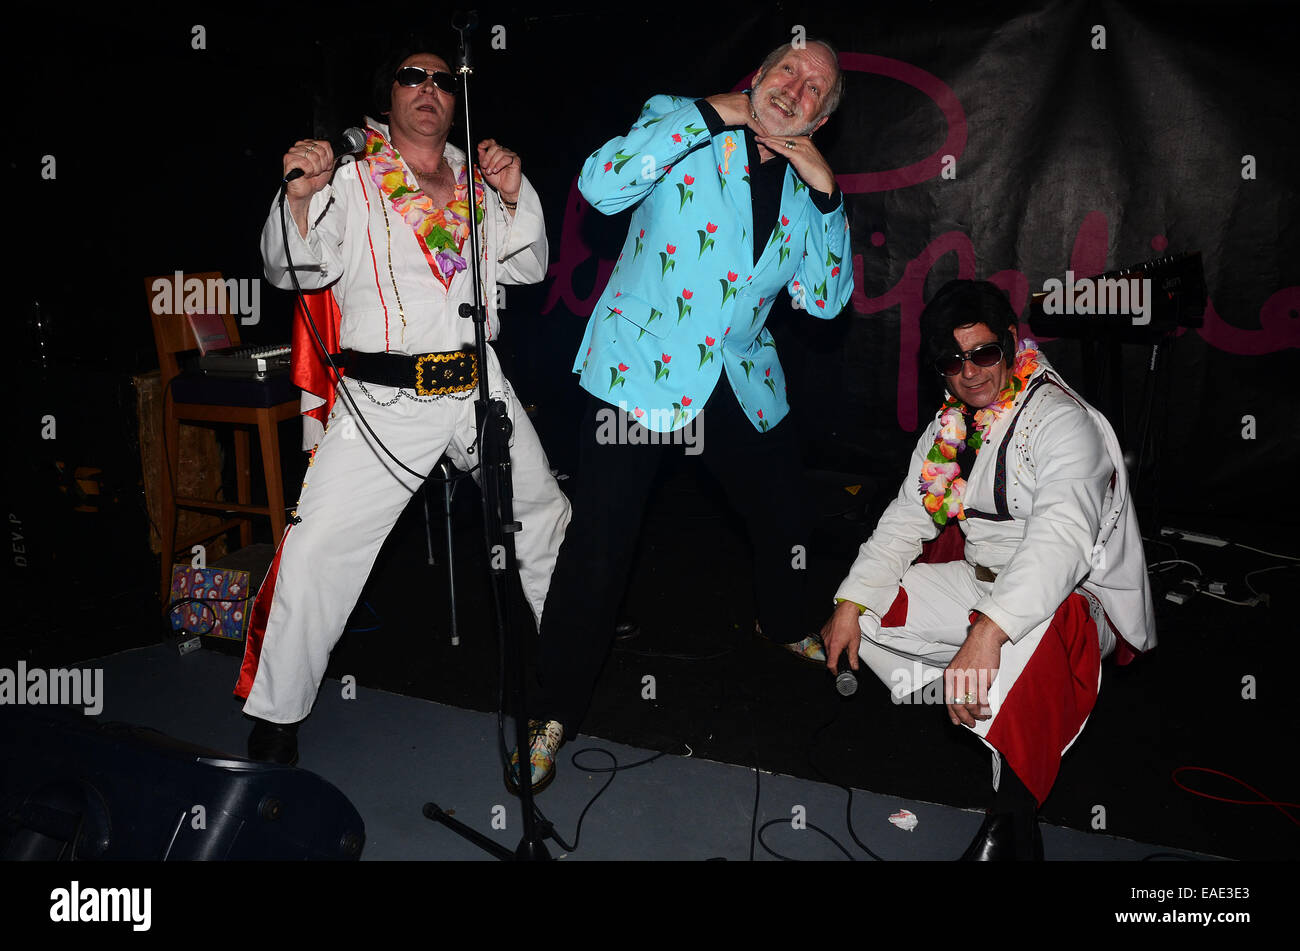 Alice Aid The Alice on Mars Fundraiser at the Pipeline Bar to raise money for a movie adaptaion of Robert Rankins Alice On Mars book  Featuring: Robert Rankin,THE KING ELVISES Where: London, United Kingdom When: 10 May 2014 Stock Photo